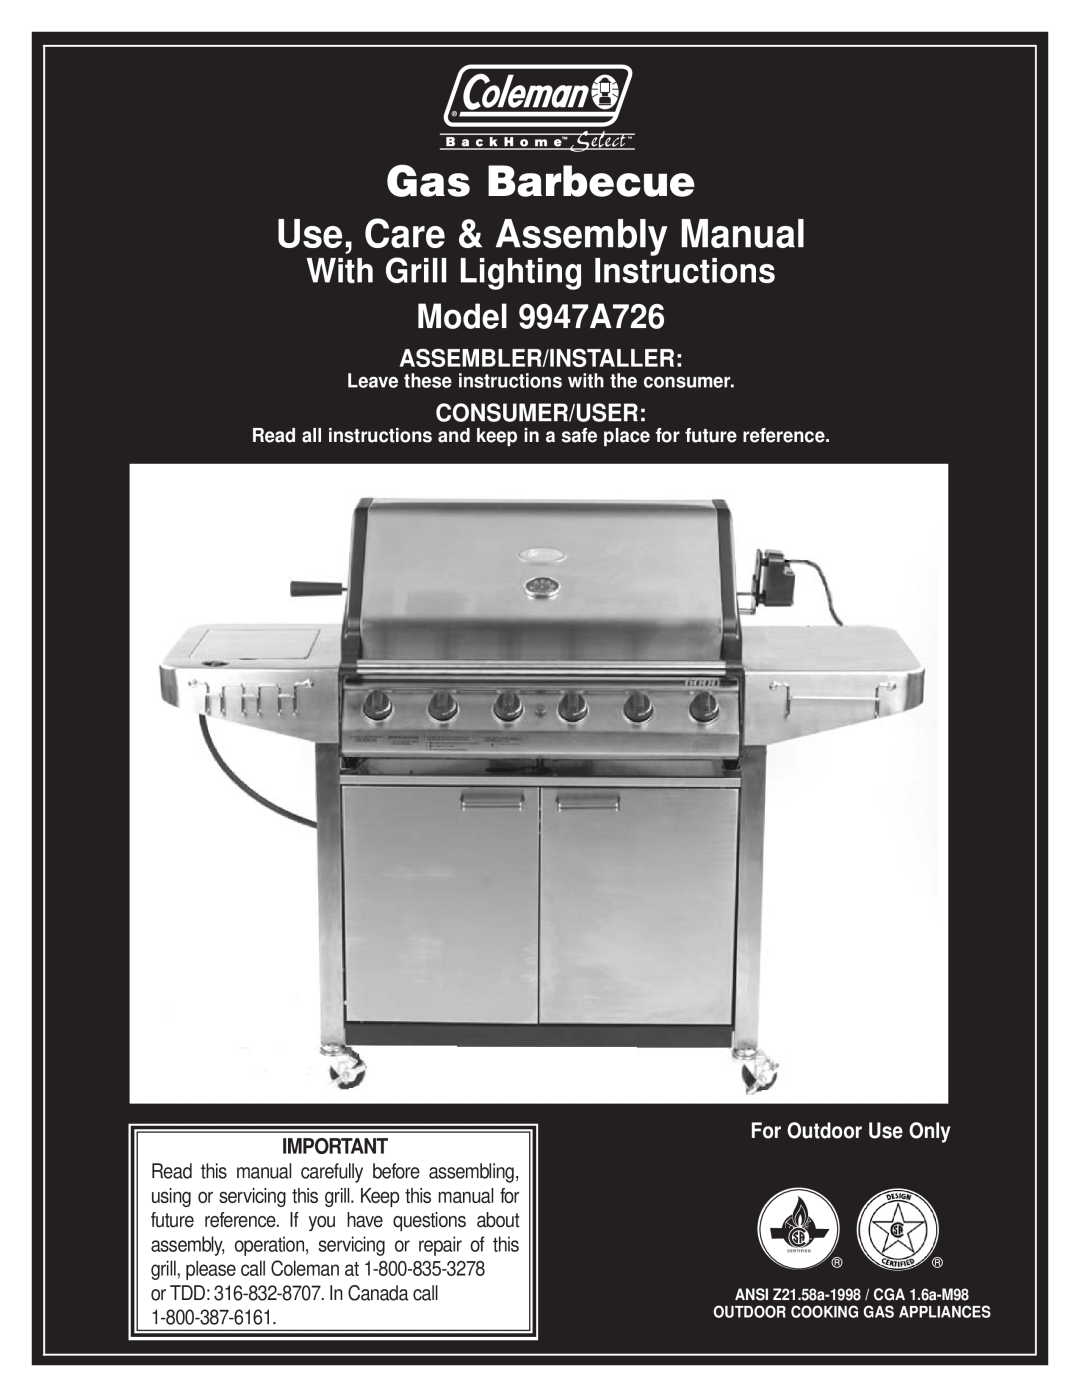 Coleman 9947A726 manual Leave these instructions with the consumer, or TDD 316-832-8707. In Canada call, Gas Barbecue 